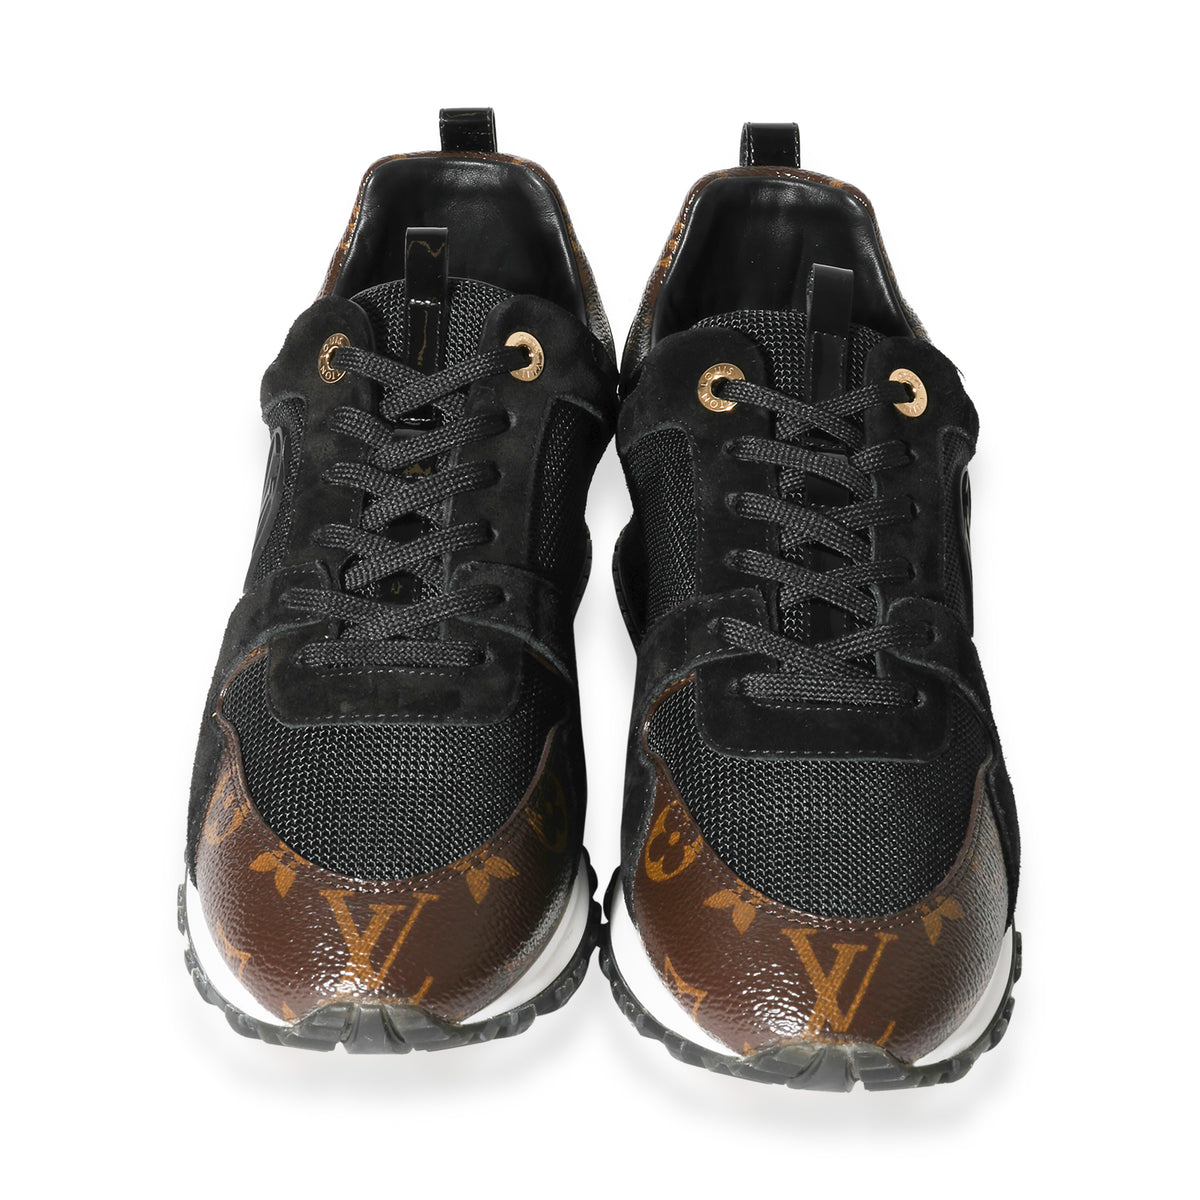 Louis Vuitton Run Away sneakers in black suede and gold patented